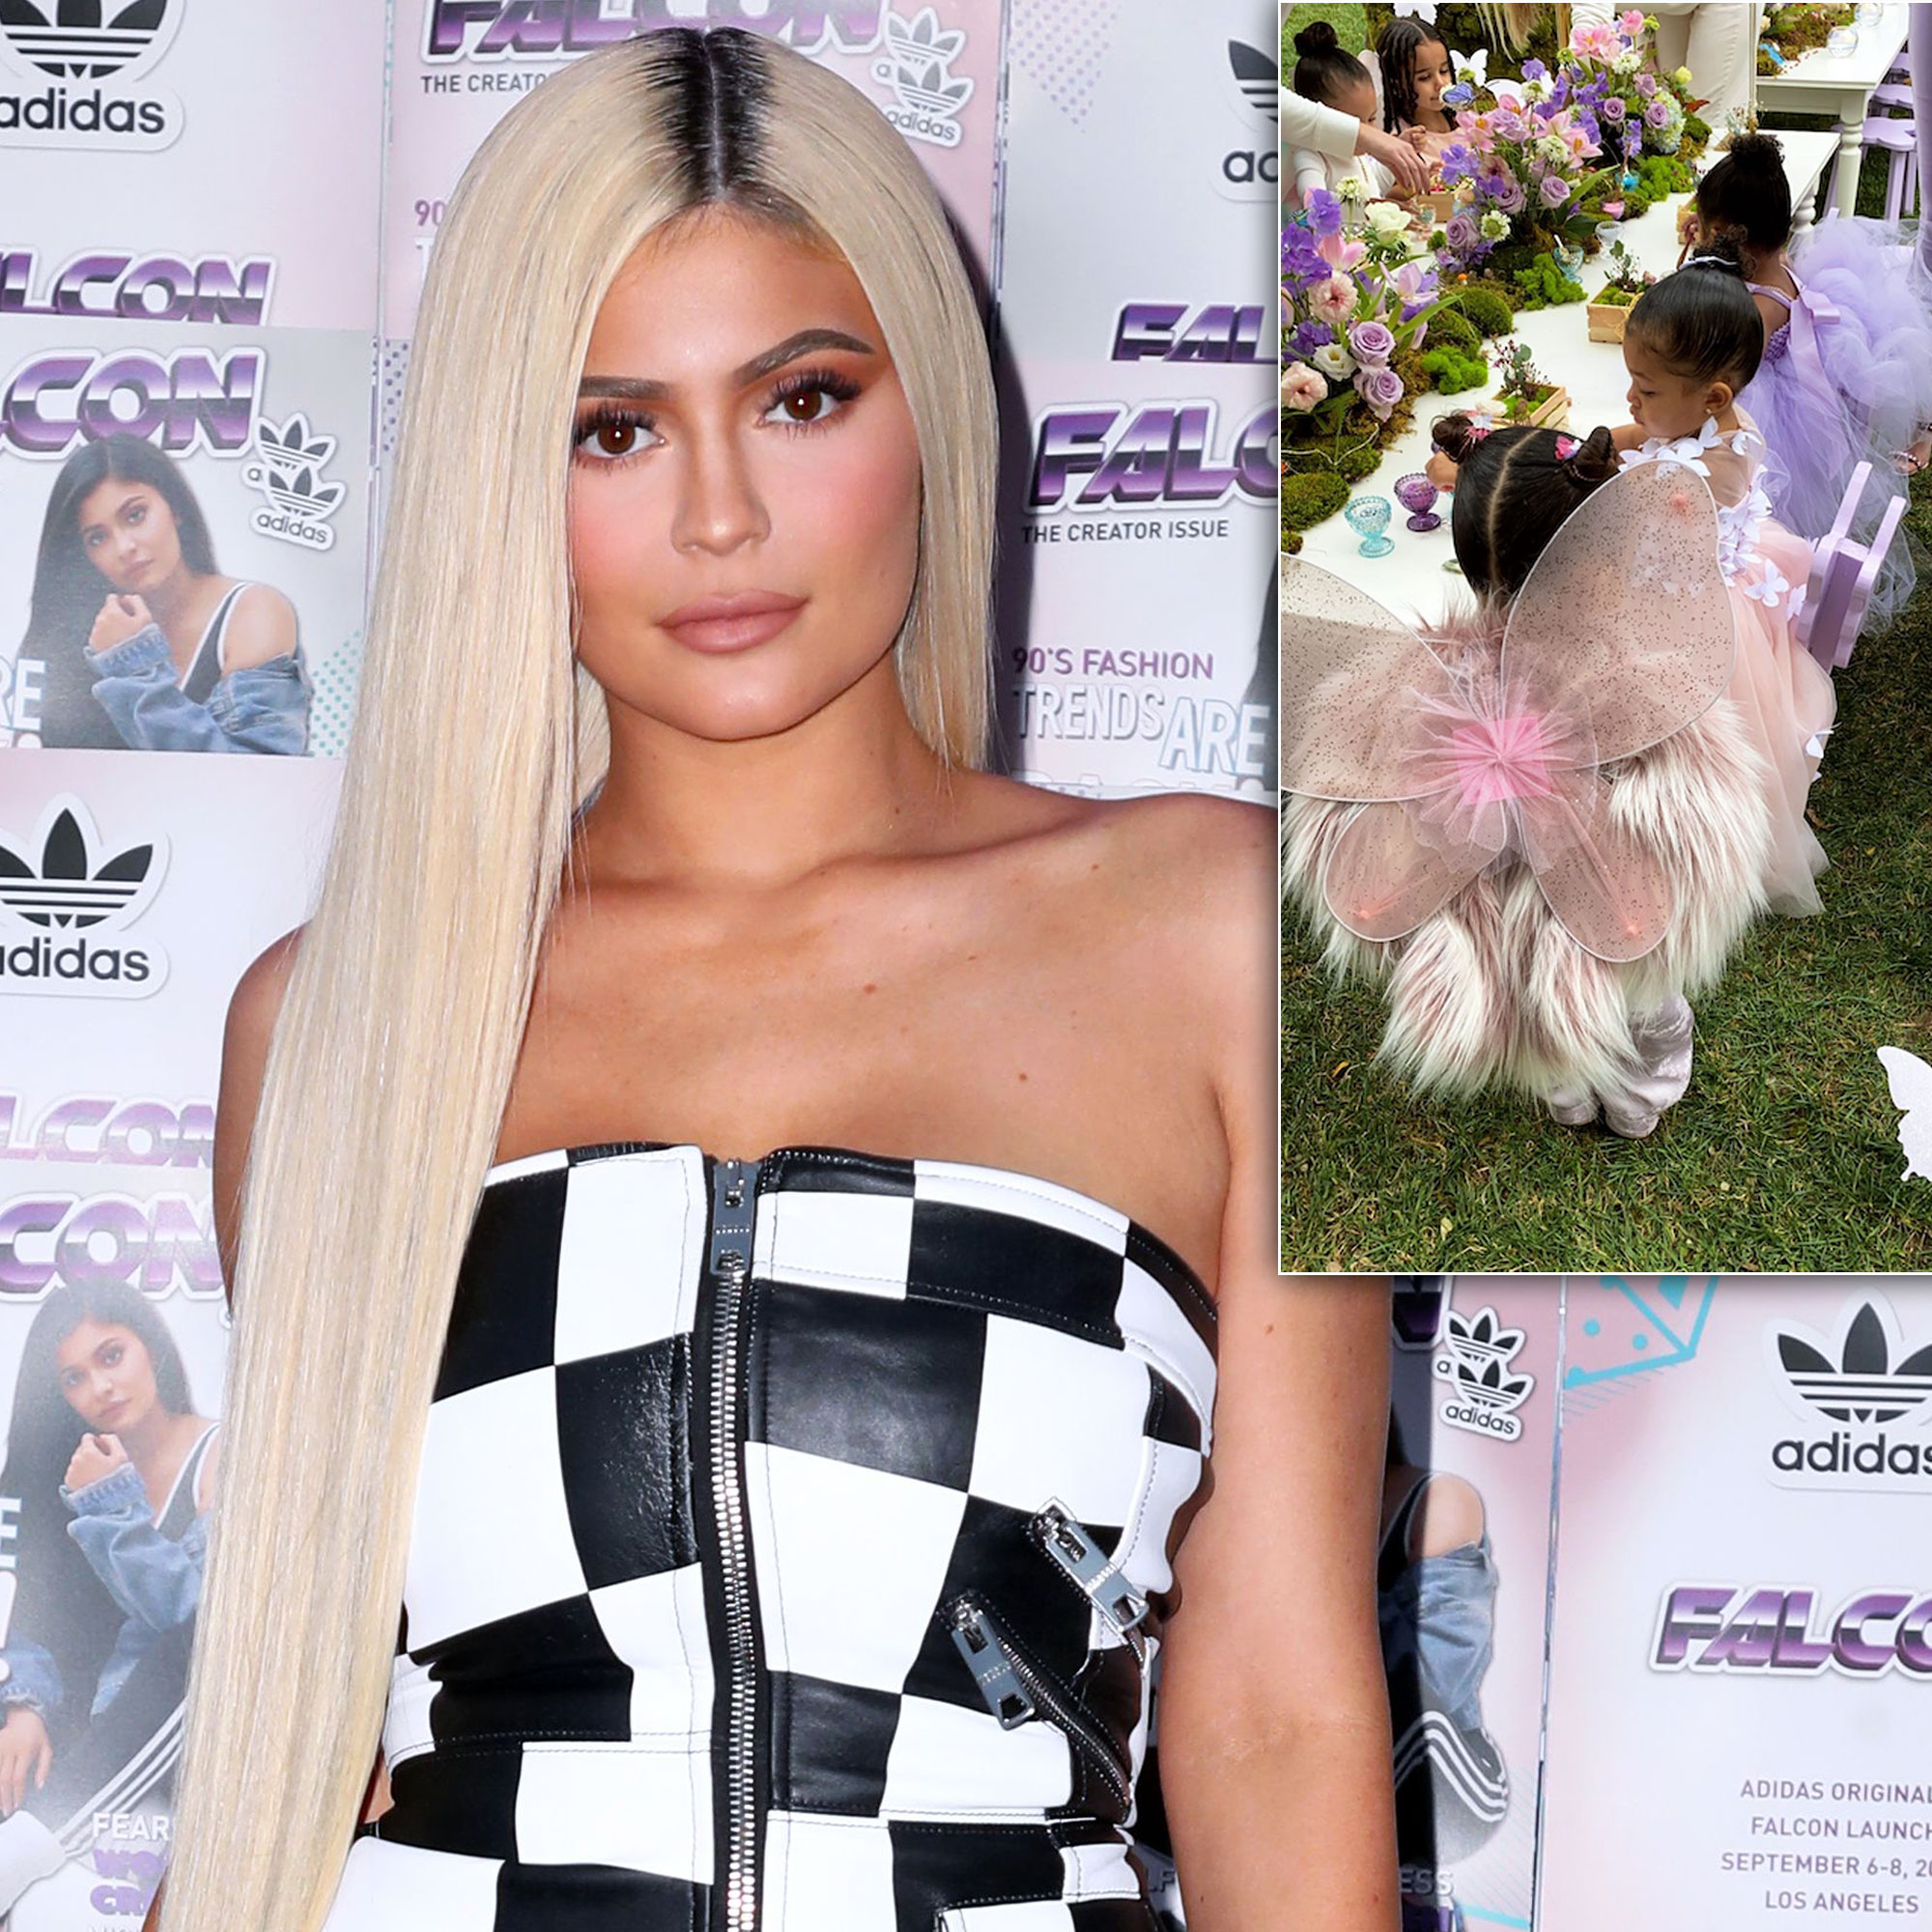 Kylie Jenner Hosts a Launch Party for the Stormi Collection Photos